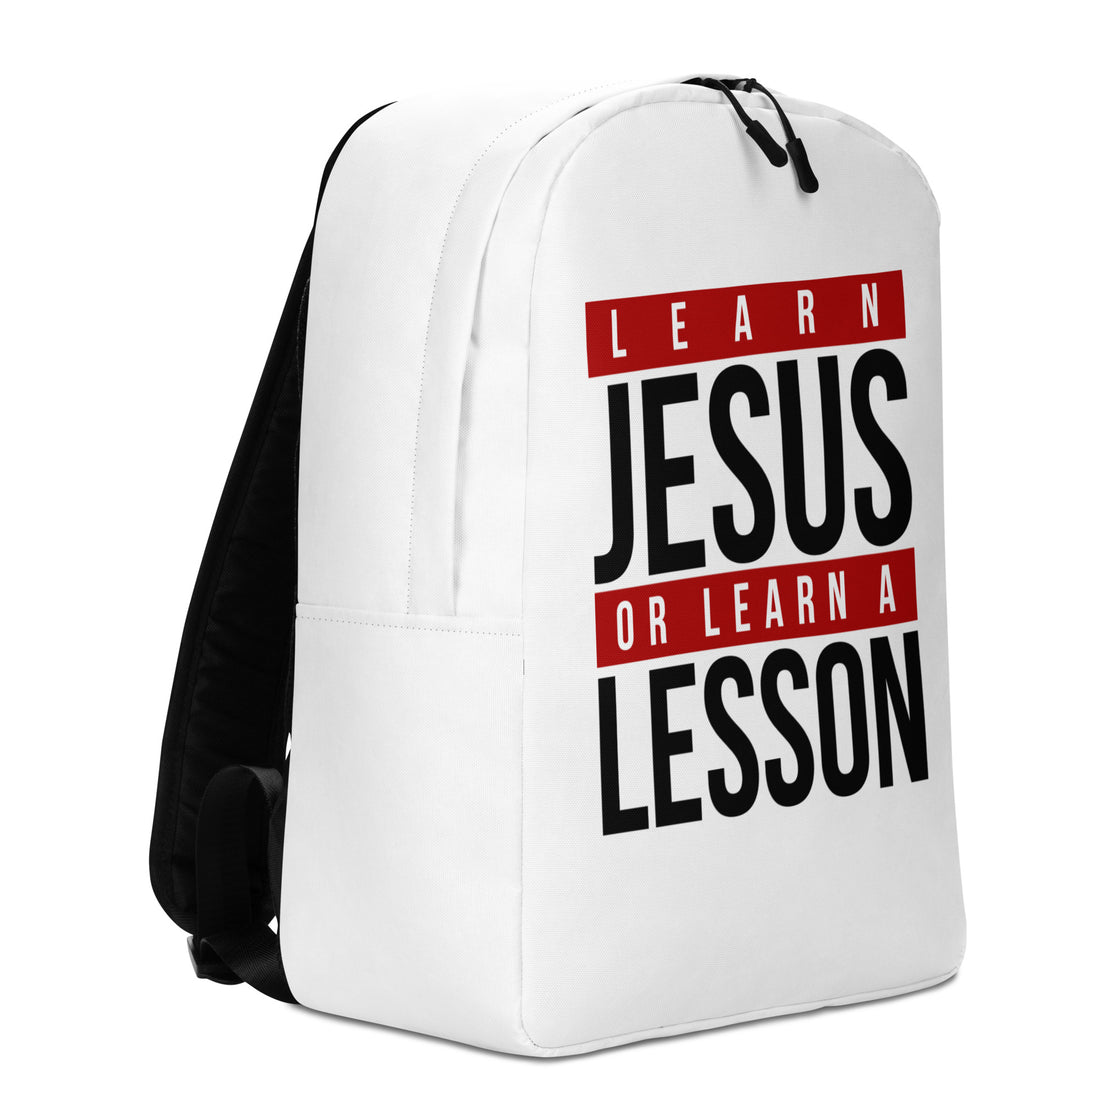 LEARN JESUS OR LEARN A LESSON BACKPACK